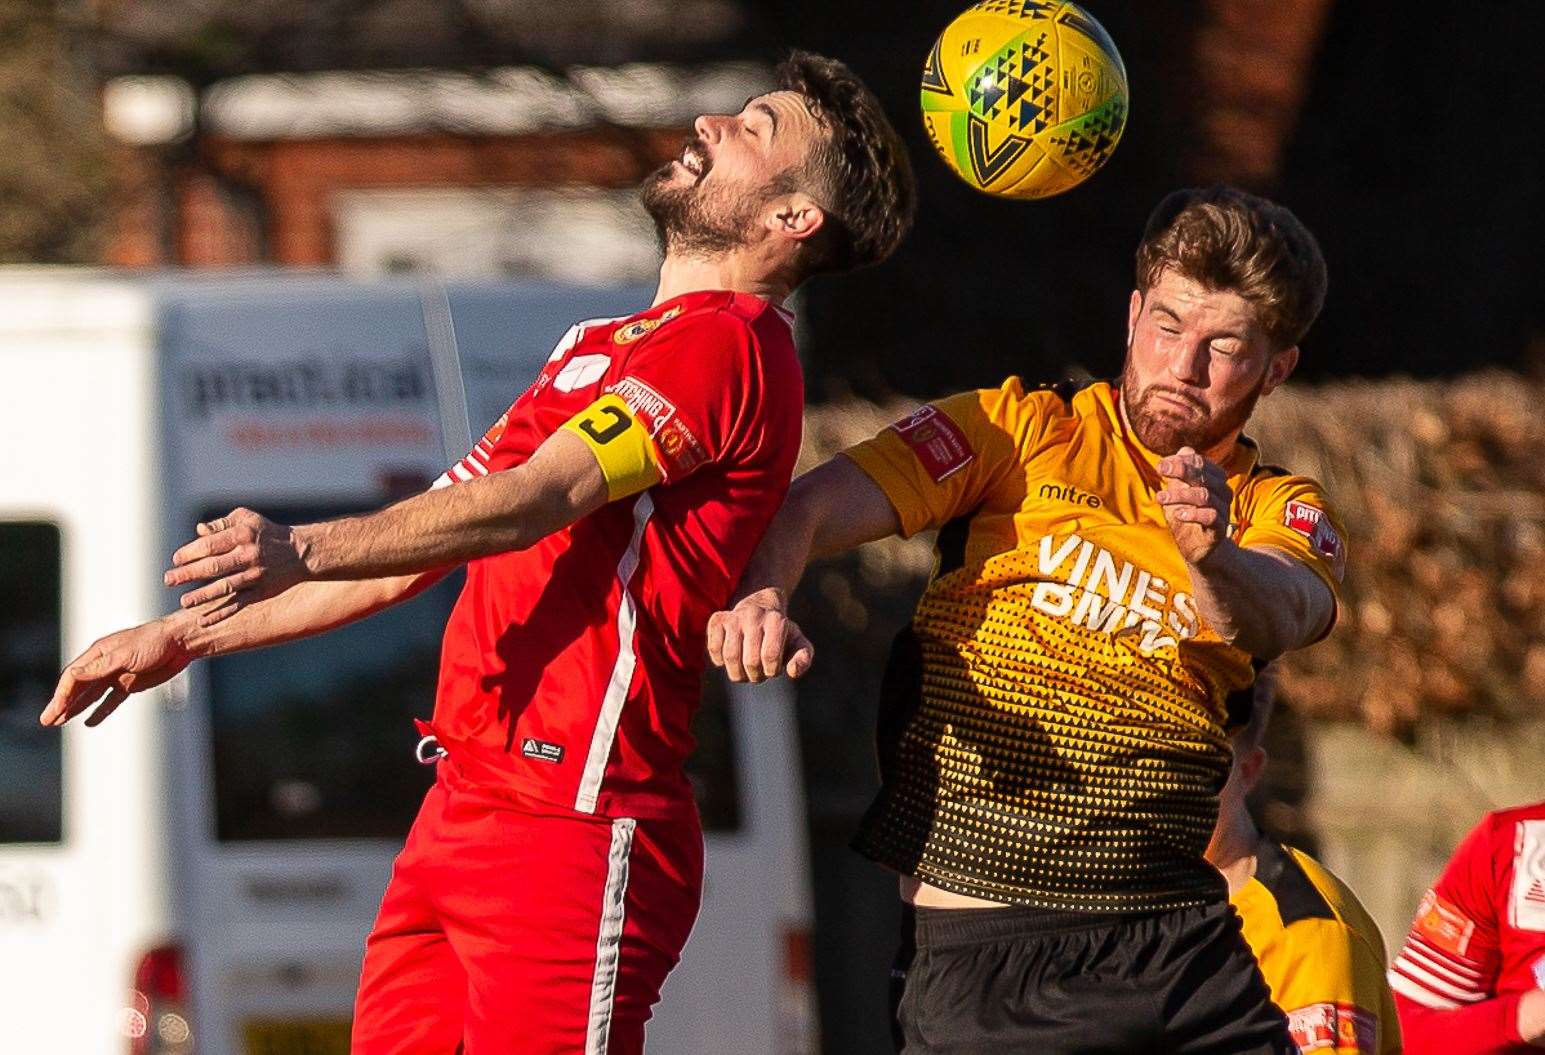 Whitstable defender Tom Mills, left, will serve a three-match ban after being sent off against Hythe. Picture: Les Biggs